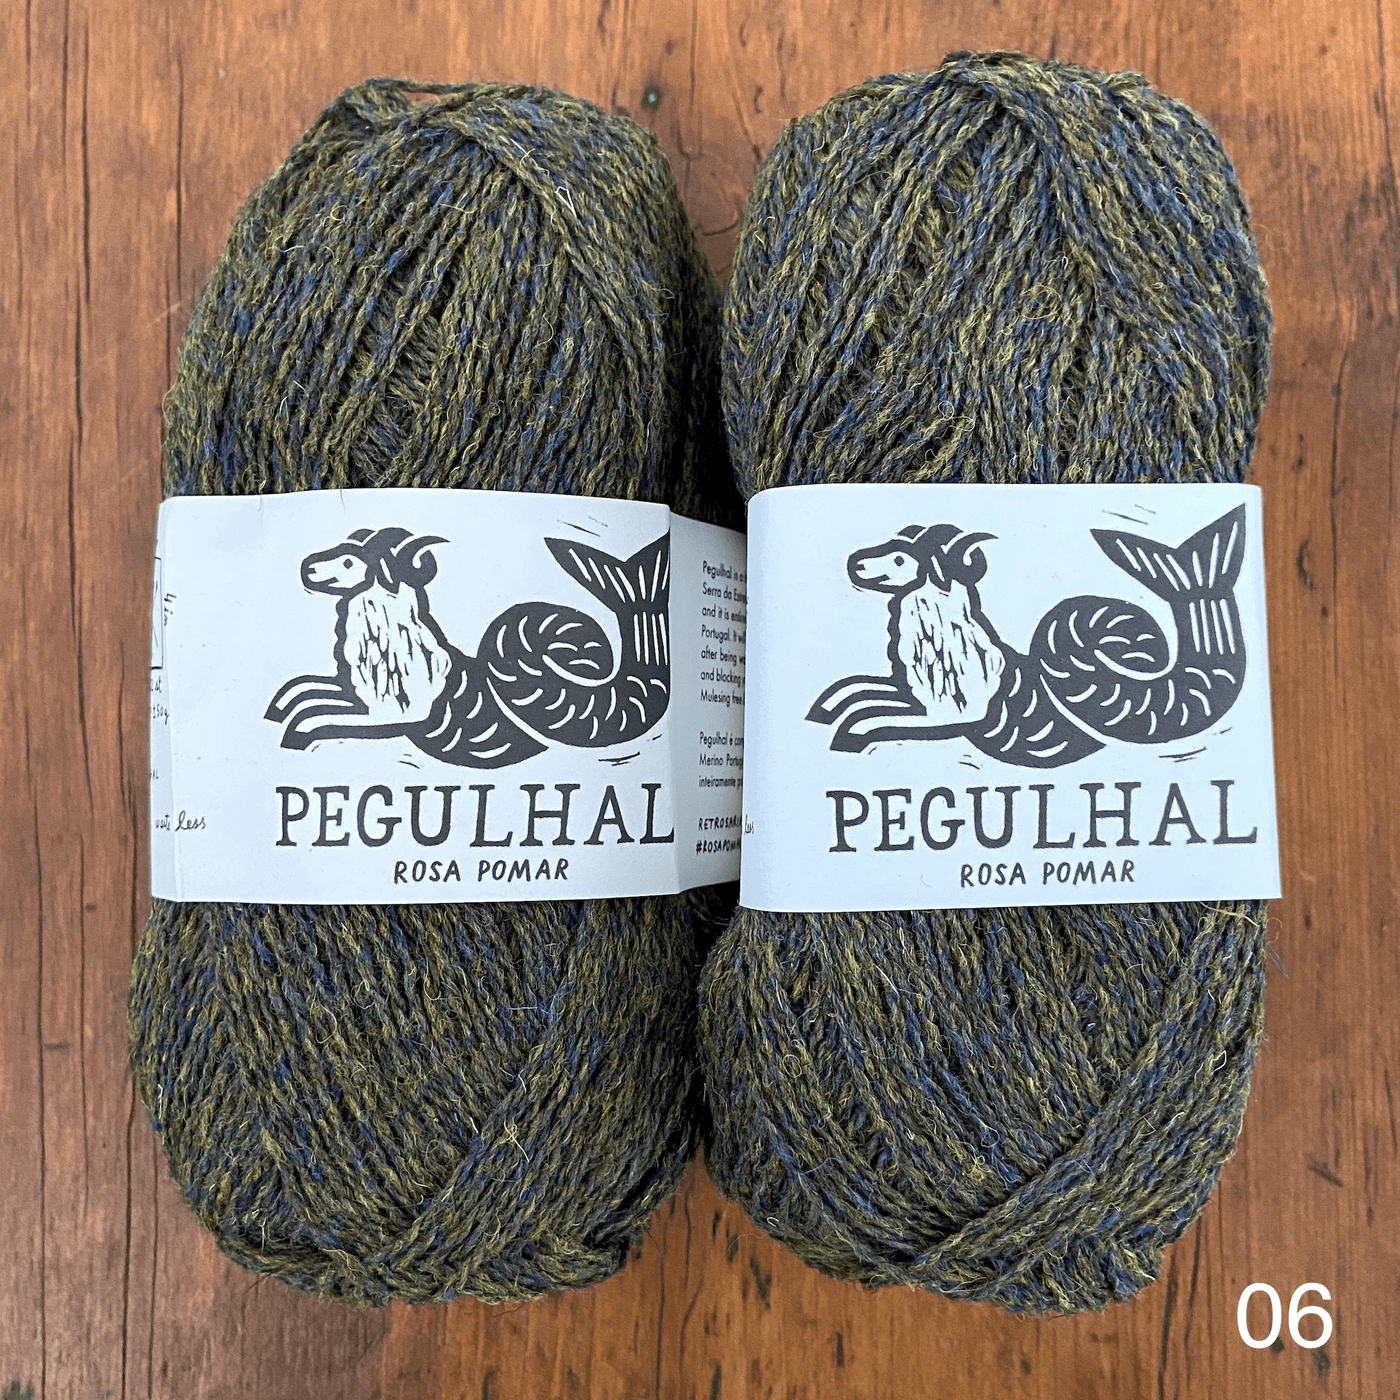 The Woolly Thistle's Retrosaria Pegulhal Fingering Weight Yarn iin 06 (green)